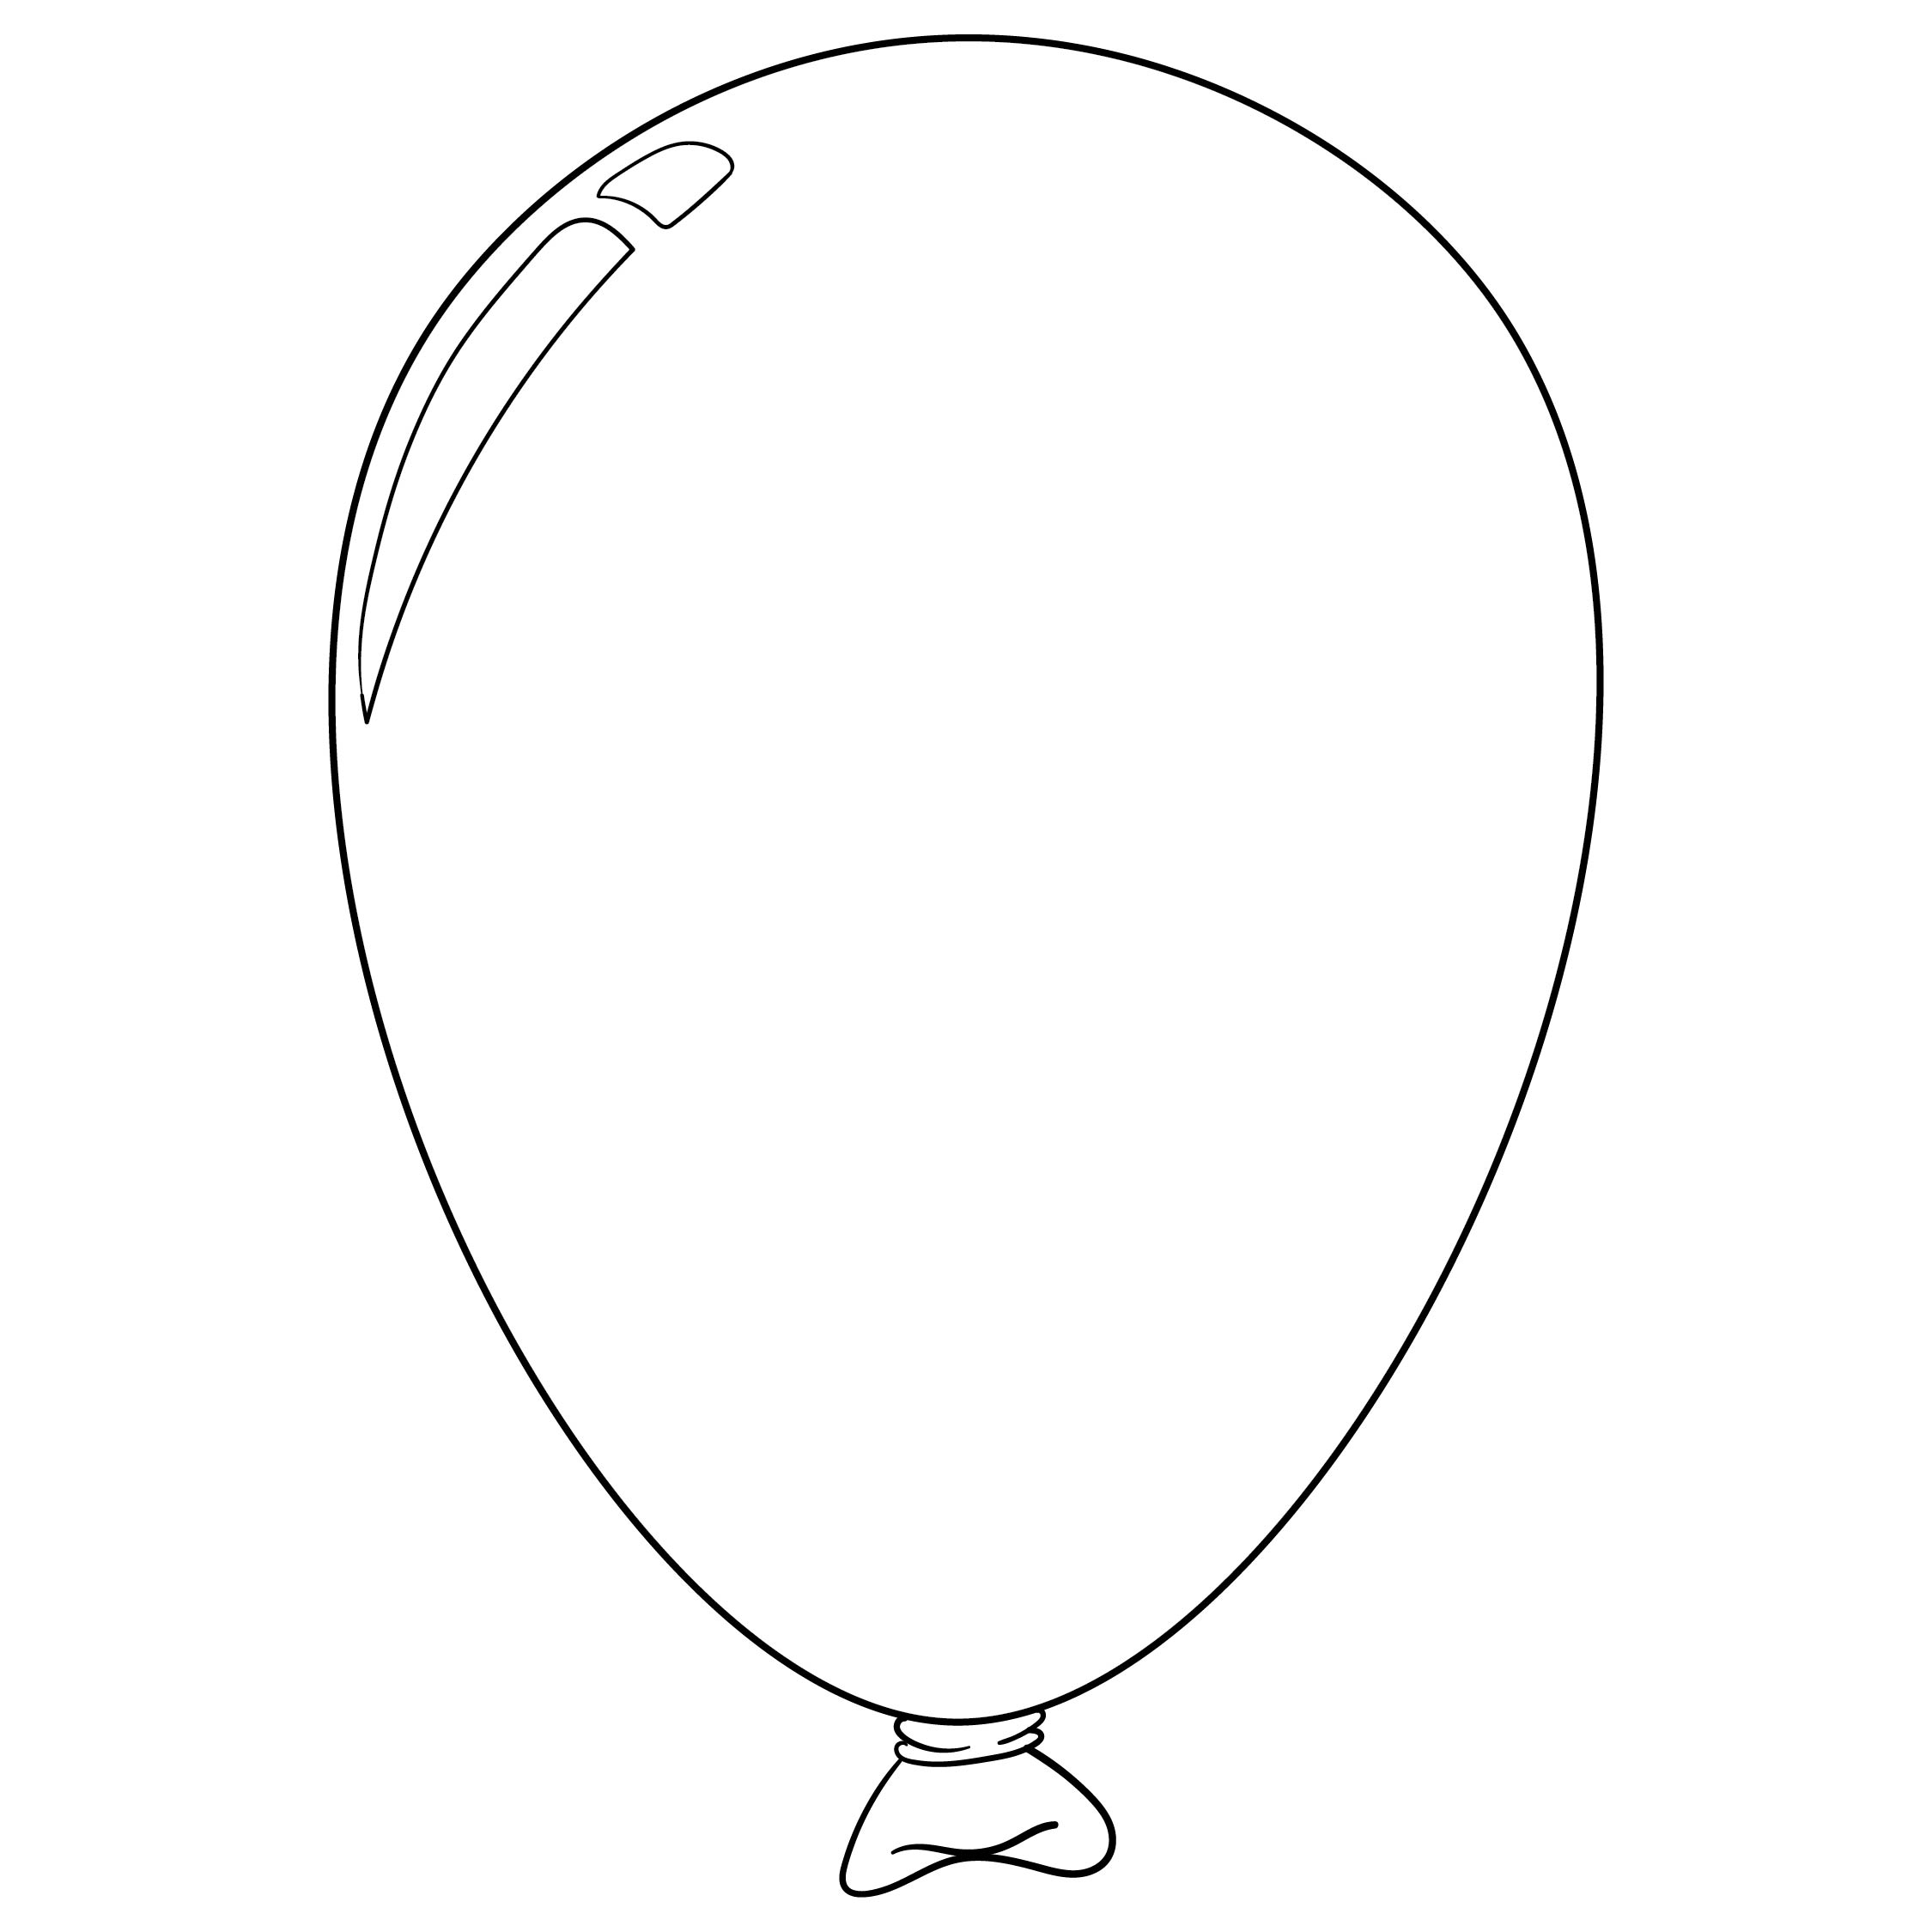 7-best-images-of-balloon-outline-printable-balloon-cut-out-template-free-printable-balloon